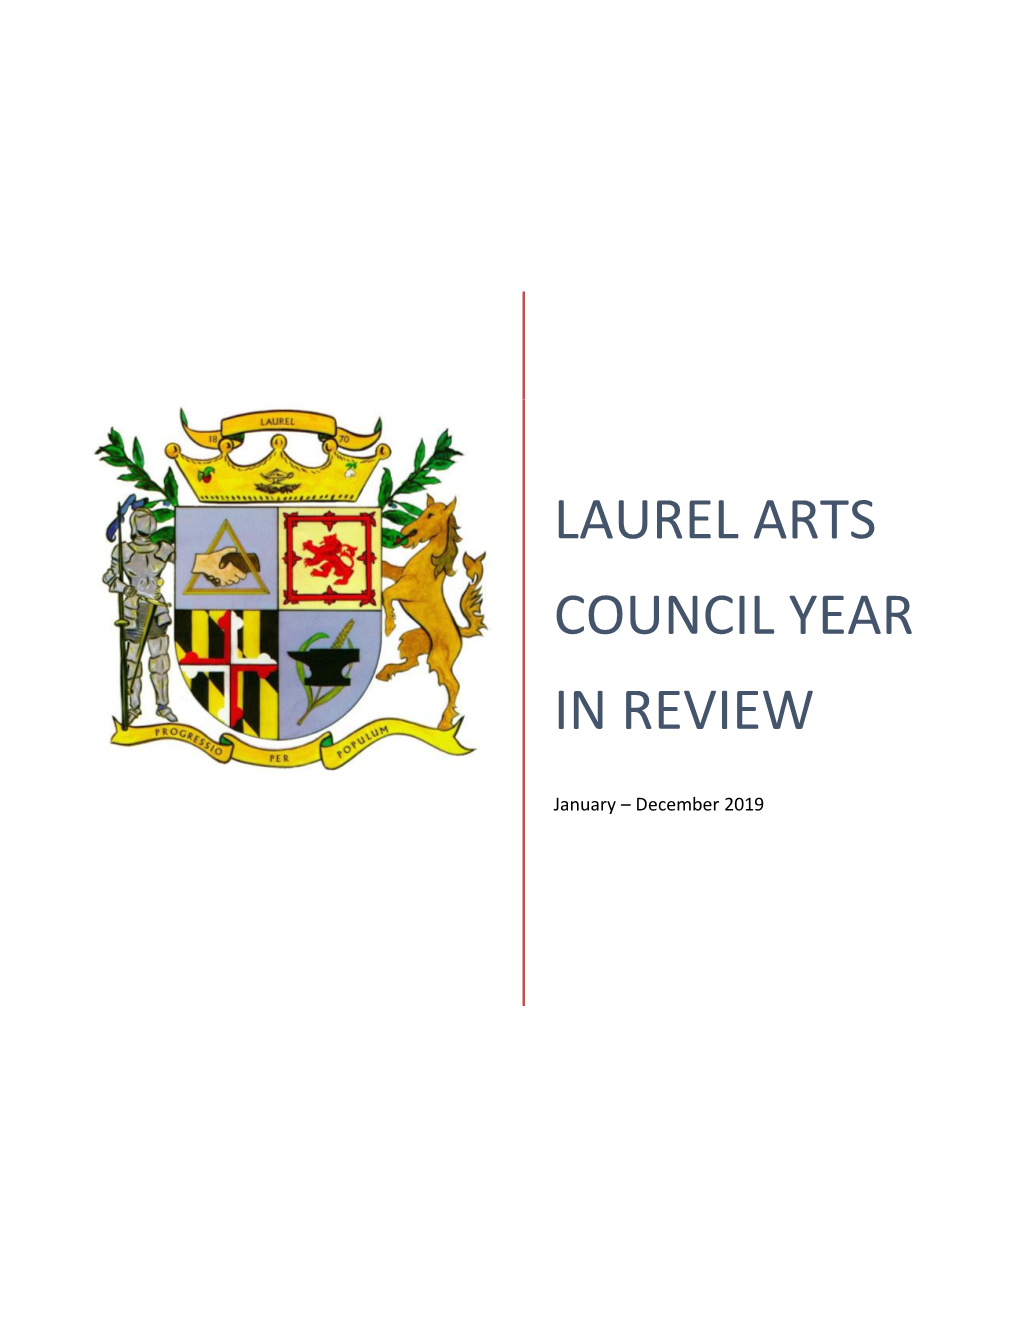 2019 Laurel Arts Council Year in Review